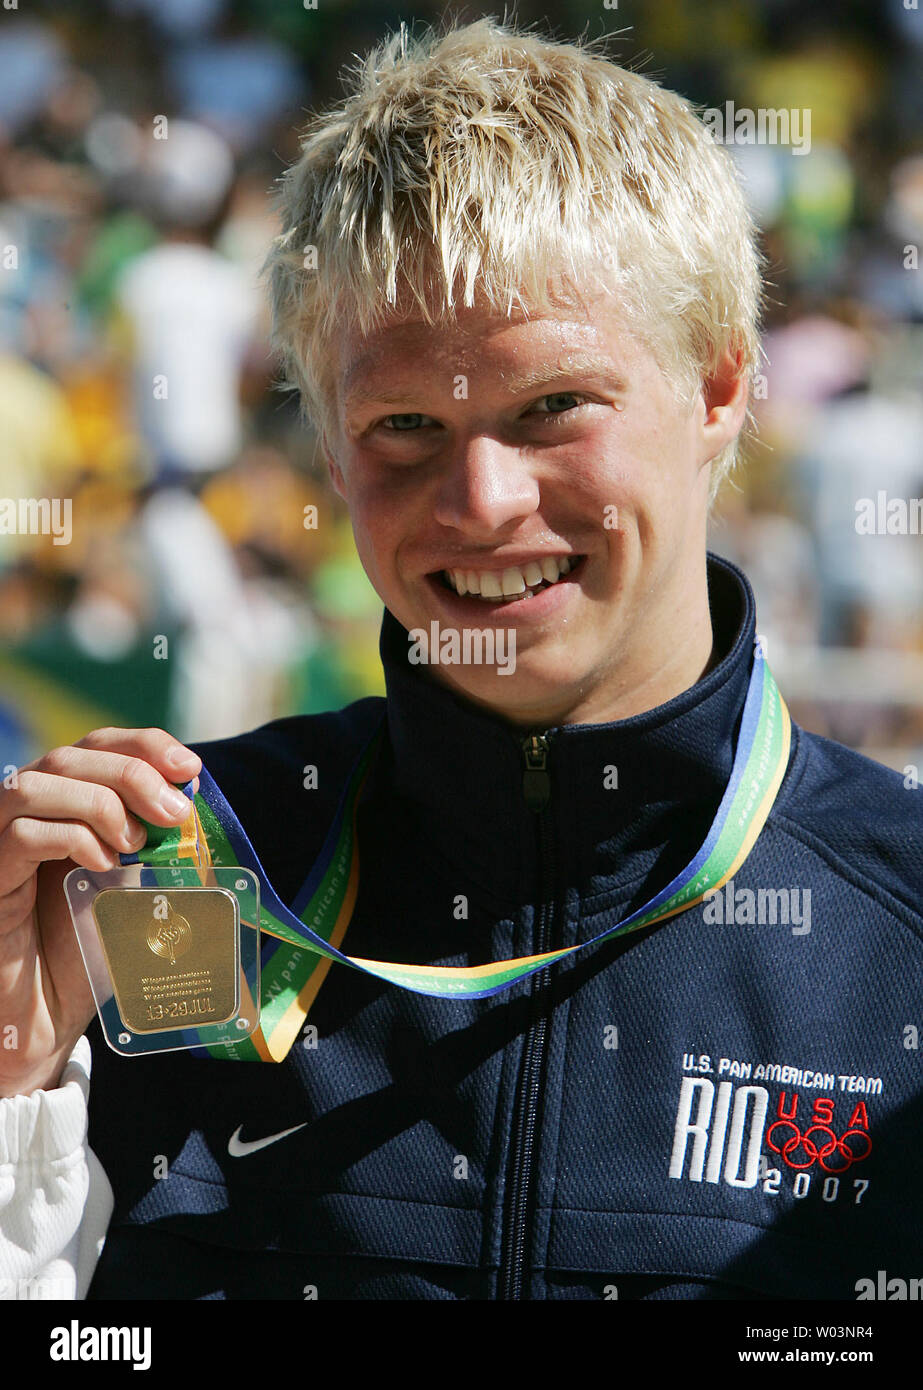 American swimmer Charles Peterson shows off his gold medal after winning the 1,500-meter freestyle finals in Rio de Janeiro, Brazil in the XV Pan American Games on July 21, 2007. Peterson set a Pan American record with a time of 15:12.33 minutes. (UPI Photo/Grace Chiu). Stock Photo